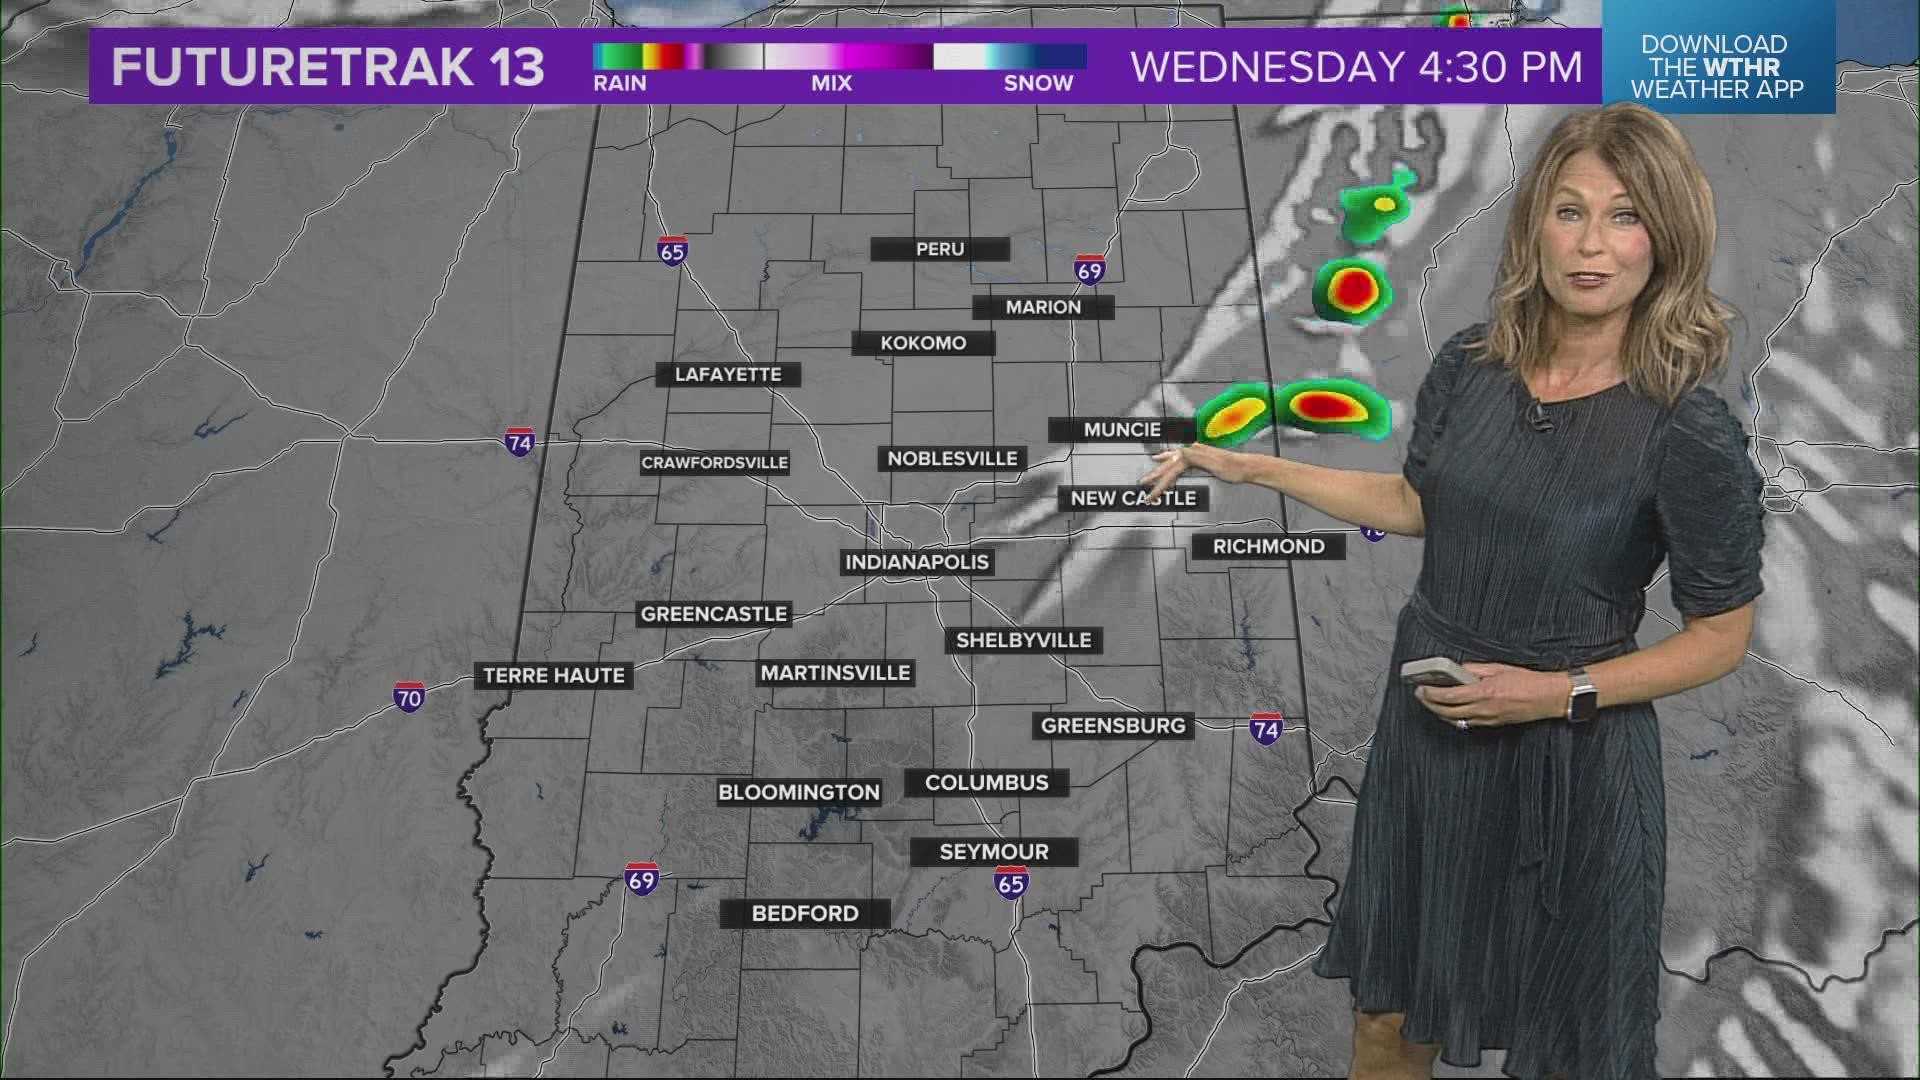 Angela has your latest forecast. Get more weather update with the WTHR Weather app.